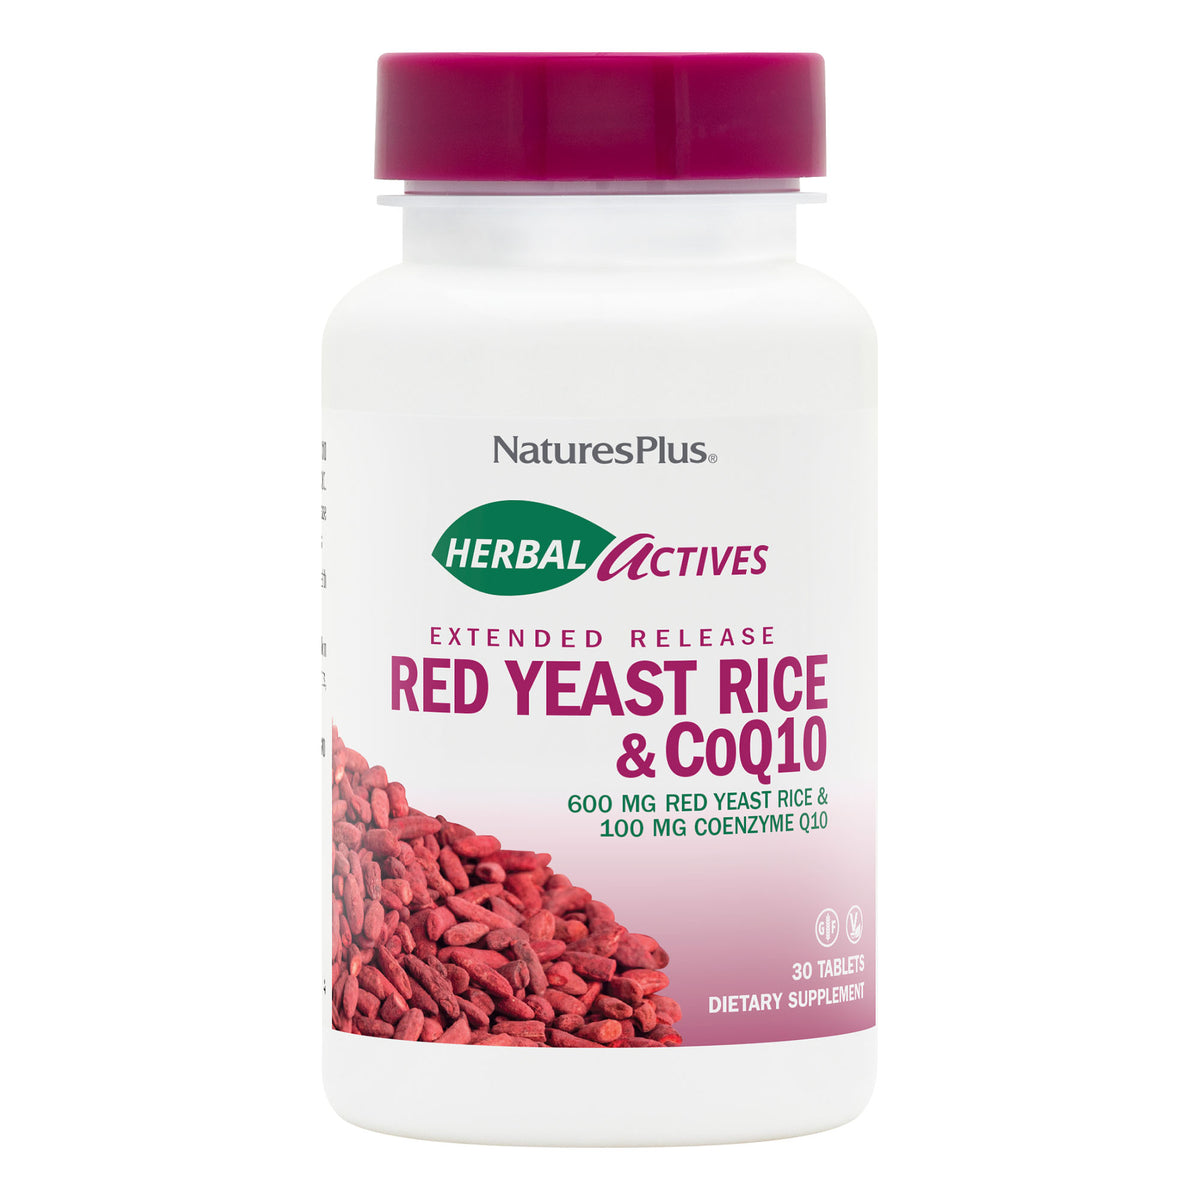 product image of Herbal Actives Red Yeast Rice 600mg/CoQ10 100mg Extended Release Tablets containing 30 Count